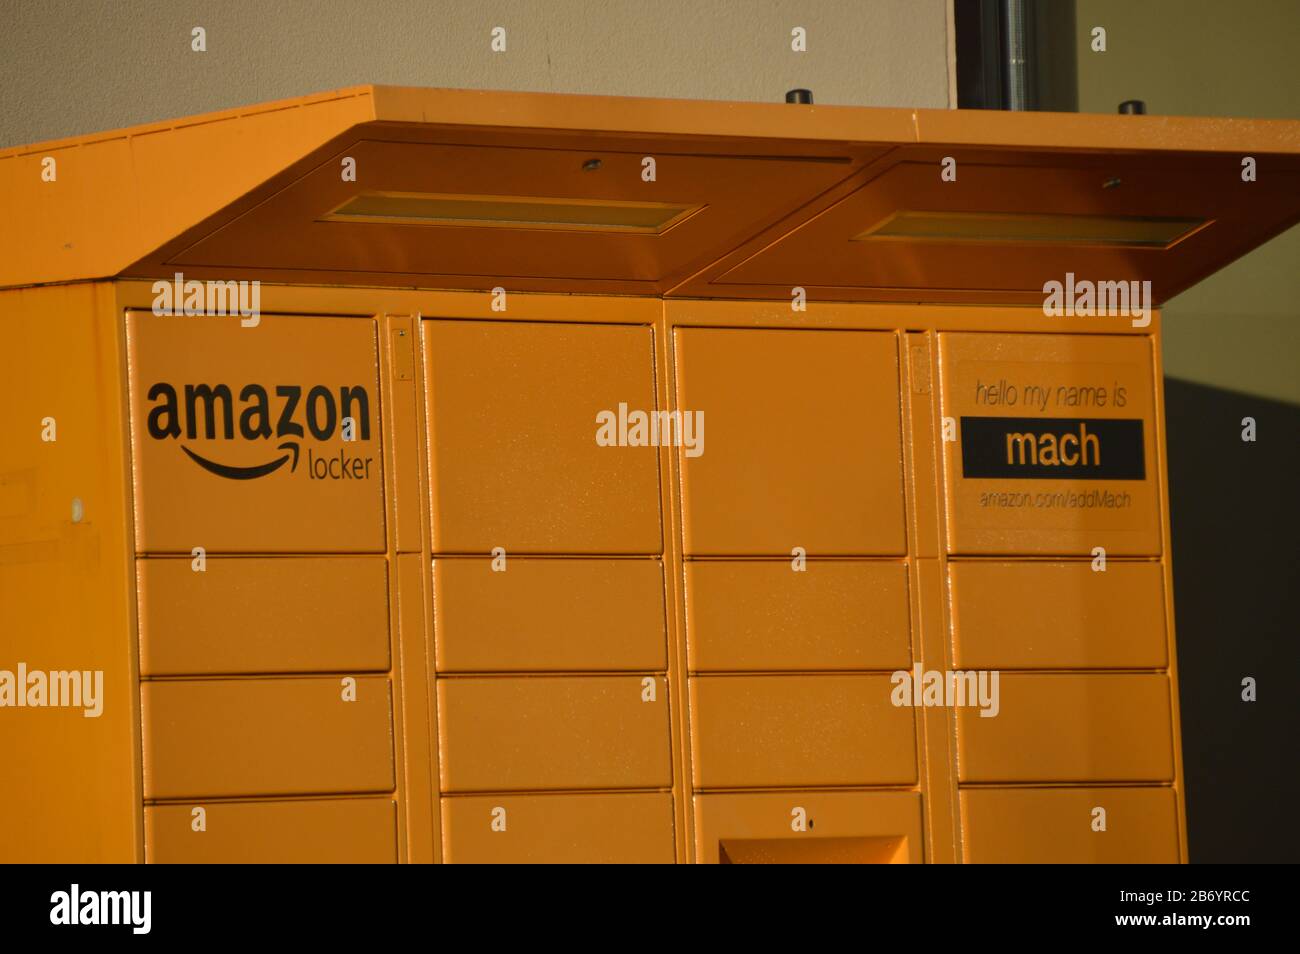 Amazon safety lockers ate a Safeway grocery store in Monroe,Washingteon. Stock Photo